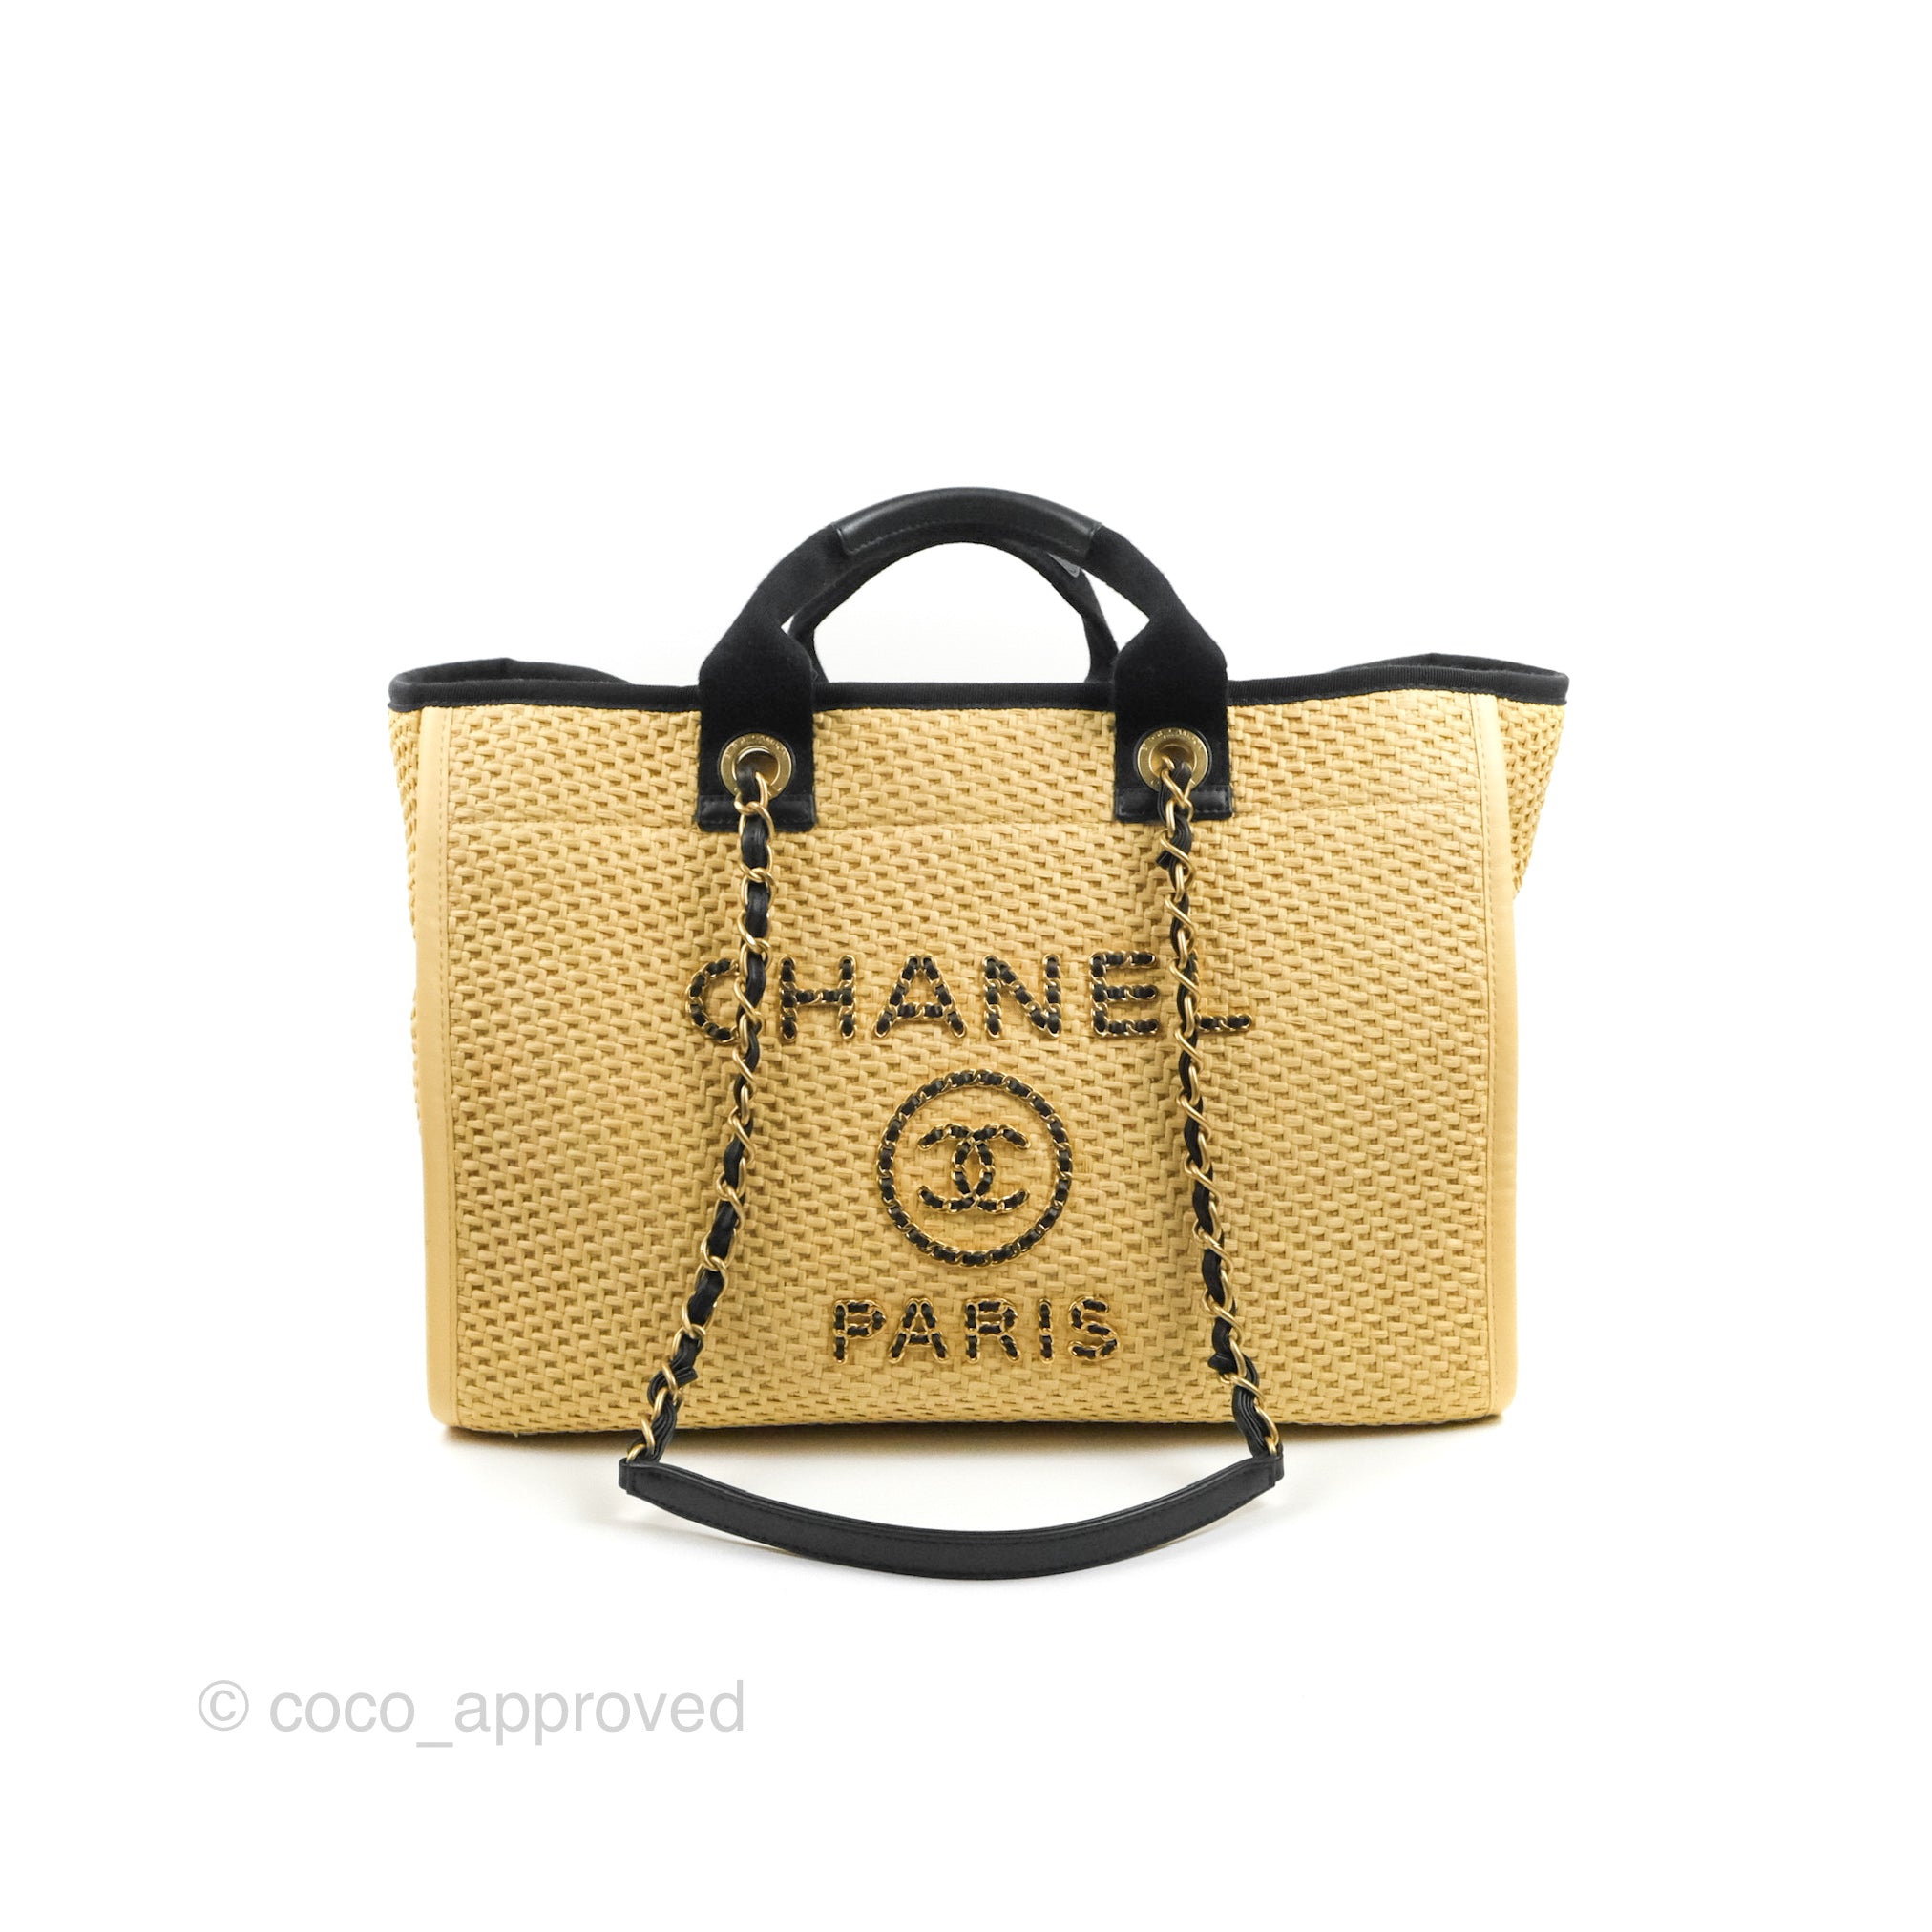 Chanel Deauville Tote w/ Pouch